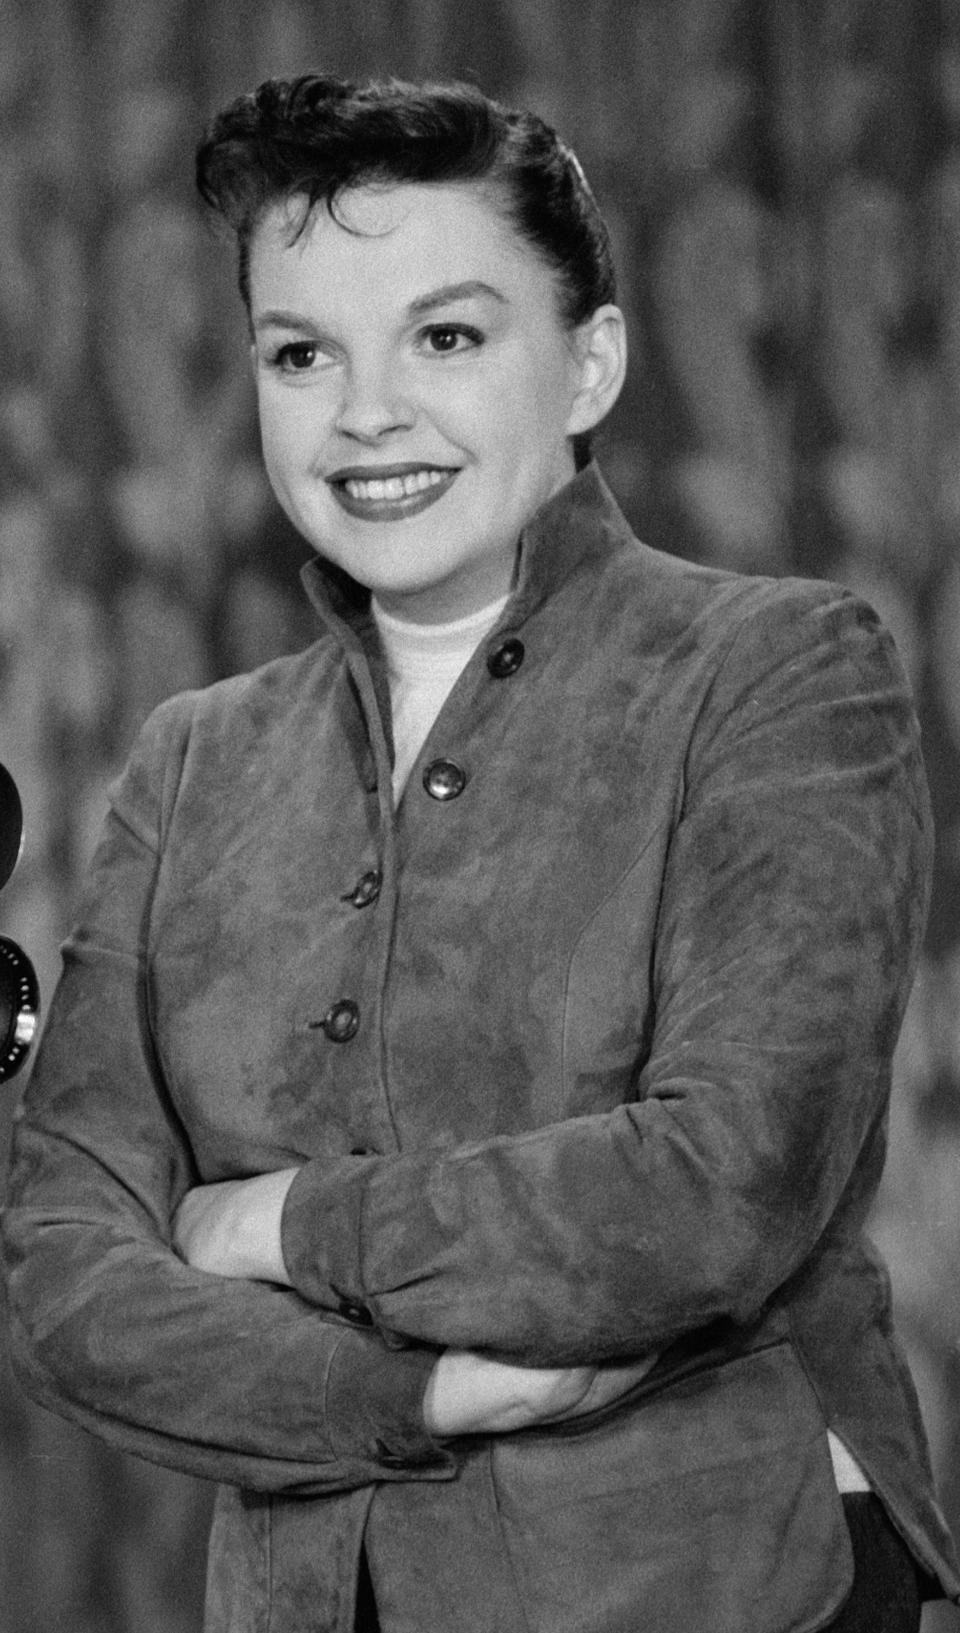 Garland on "Ford Star Jubilee" in 1955